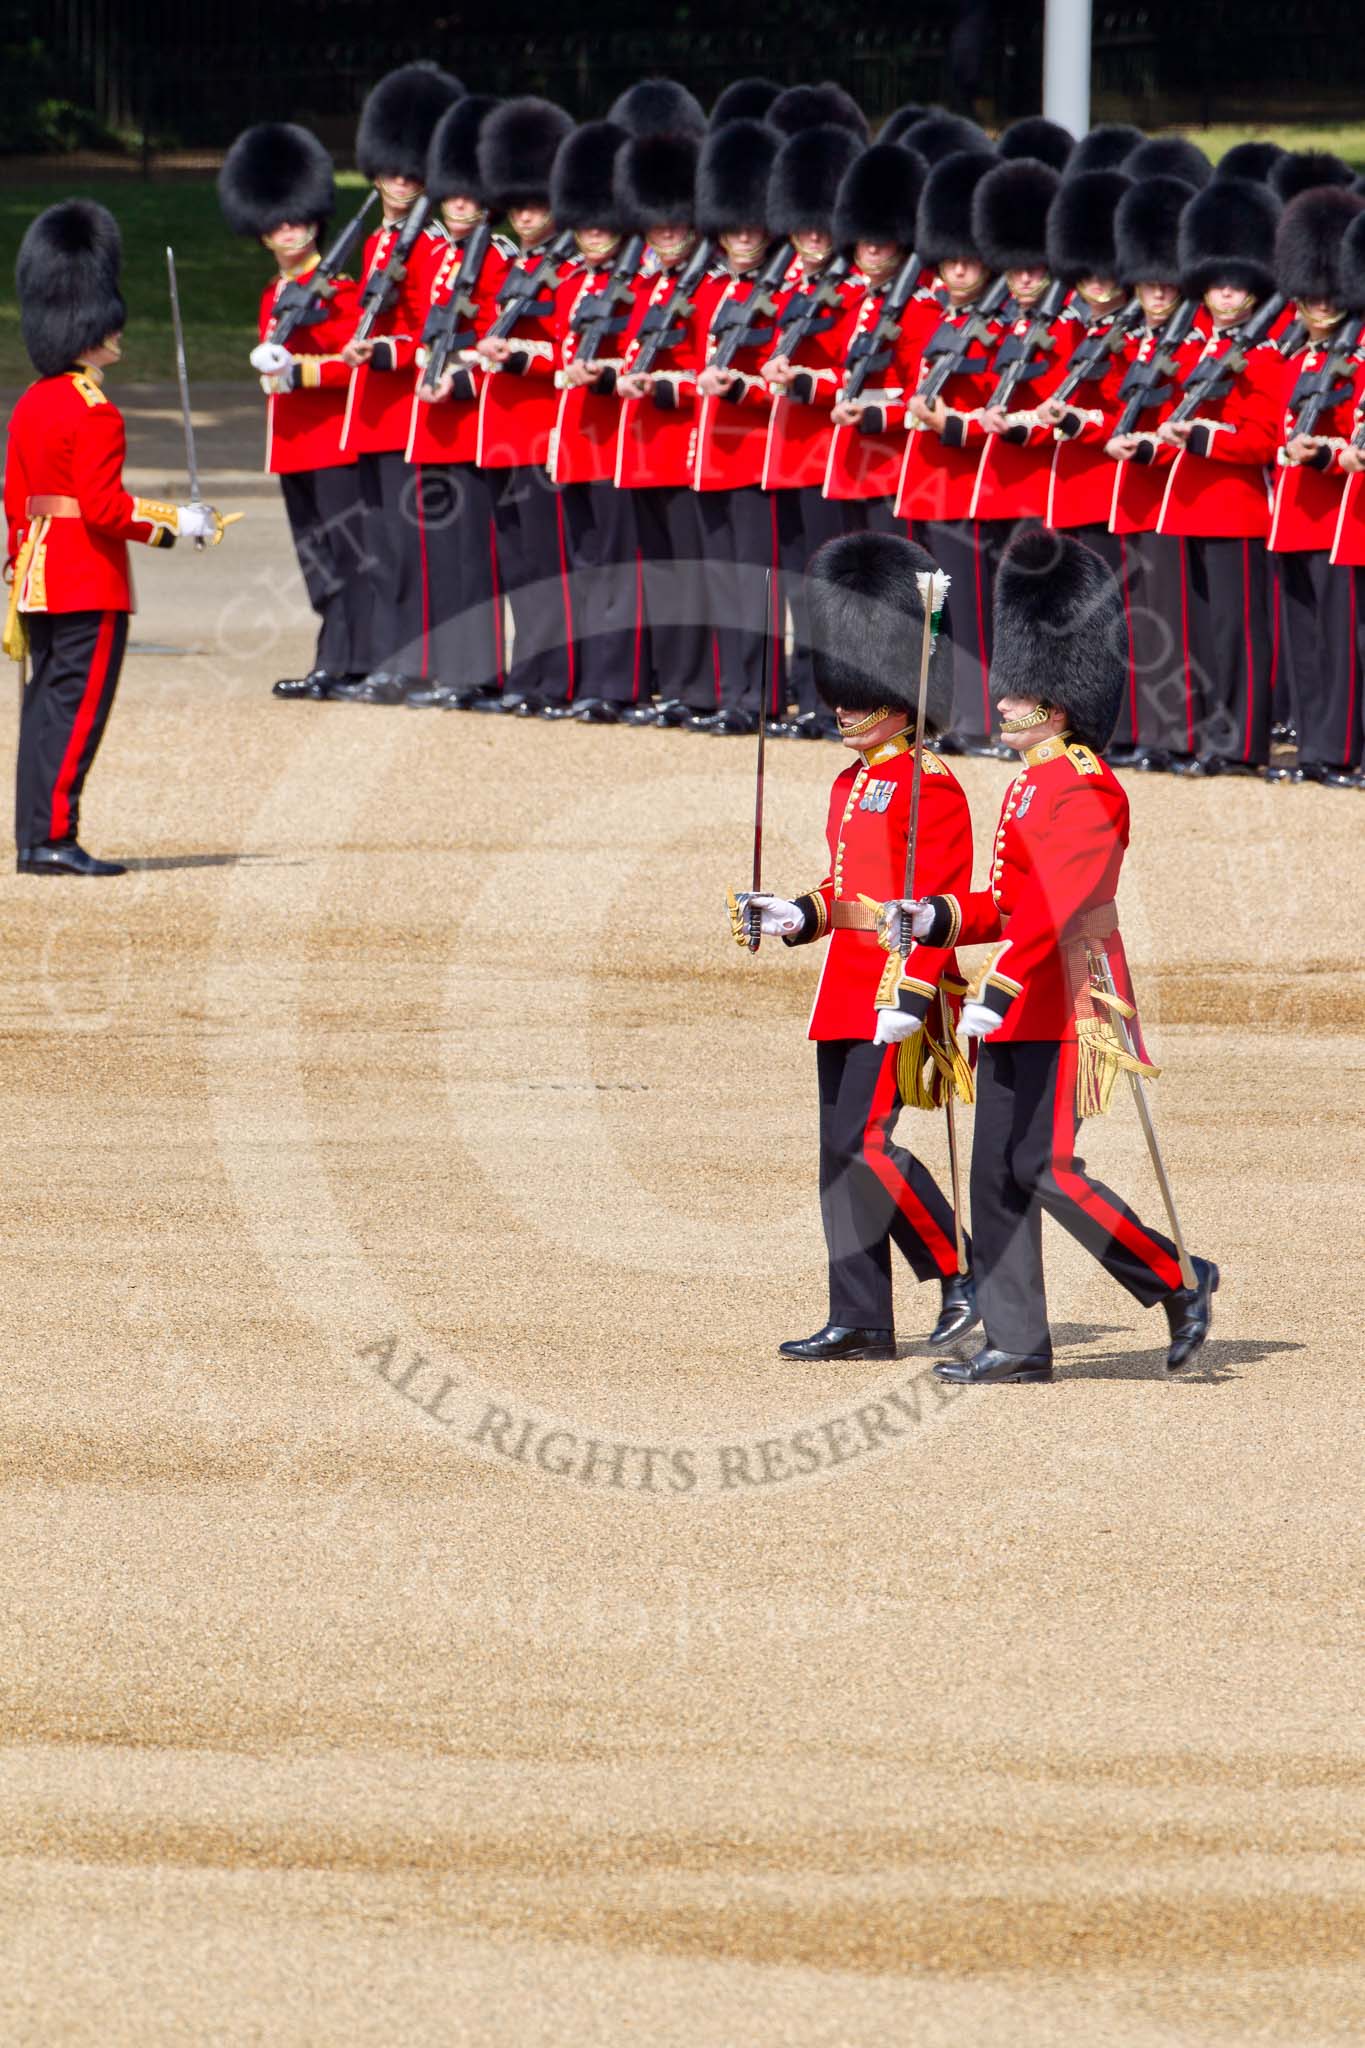 The Colonel's Review 2011: The Subaltern of No. 5 Guard, 1st Battalion Welsh Guards, and the Ensign of No. 4 Guard (Nijmegen Company Grenadier Guards)..
Horse Guards Parade, Westminster,
London SW1,

United Kingdom,
on 04 June 2011 at 10:29, image #34